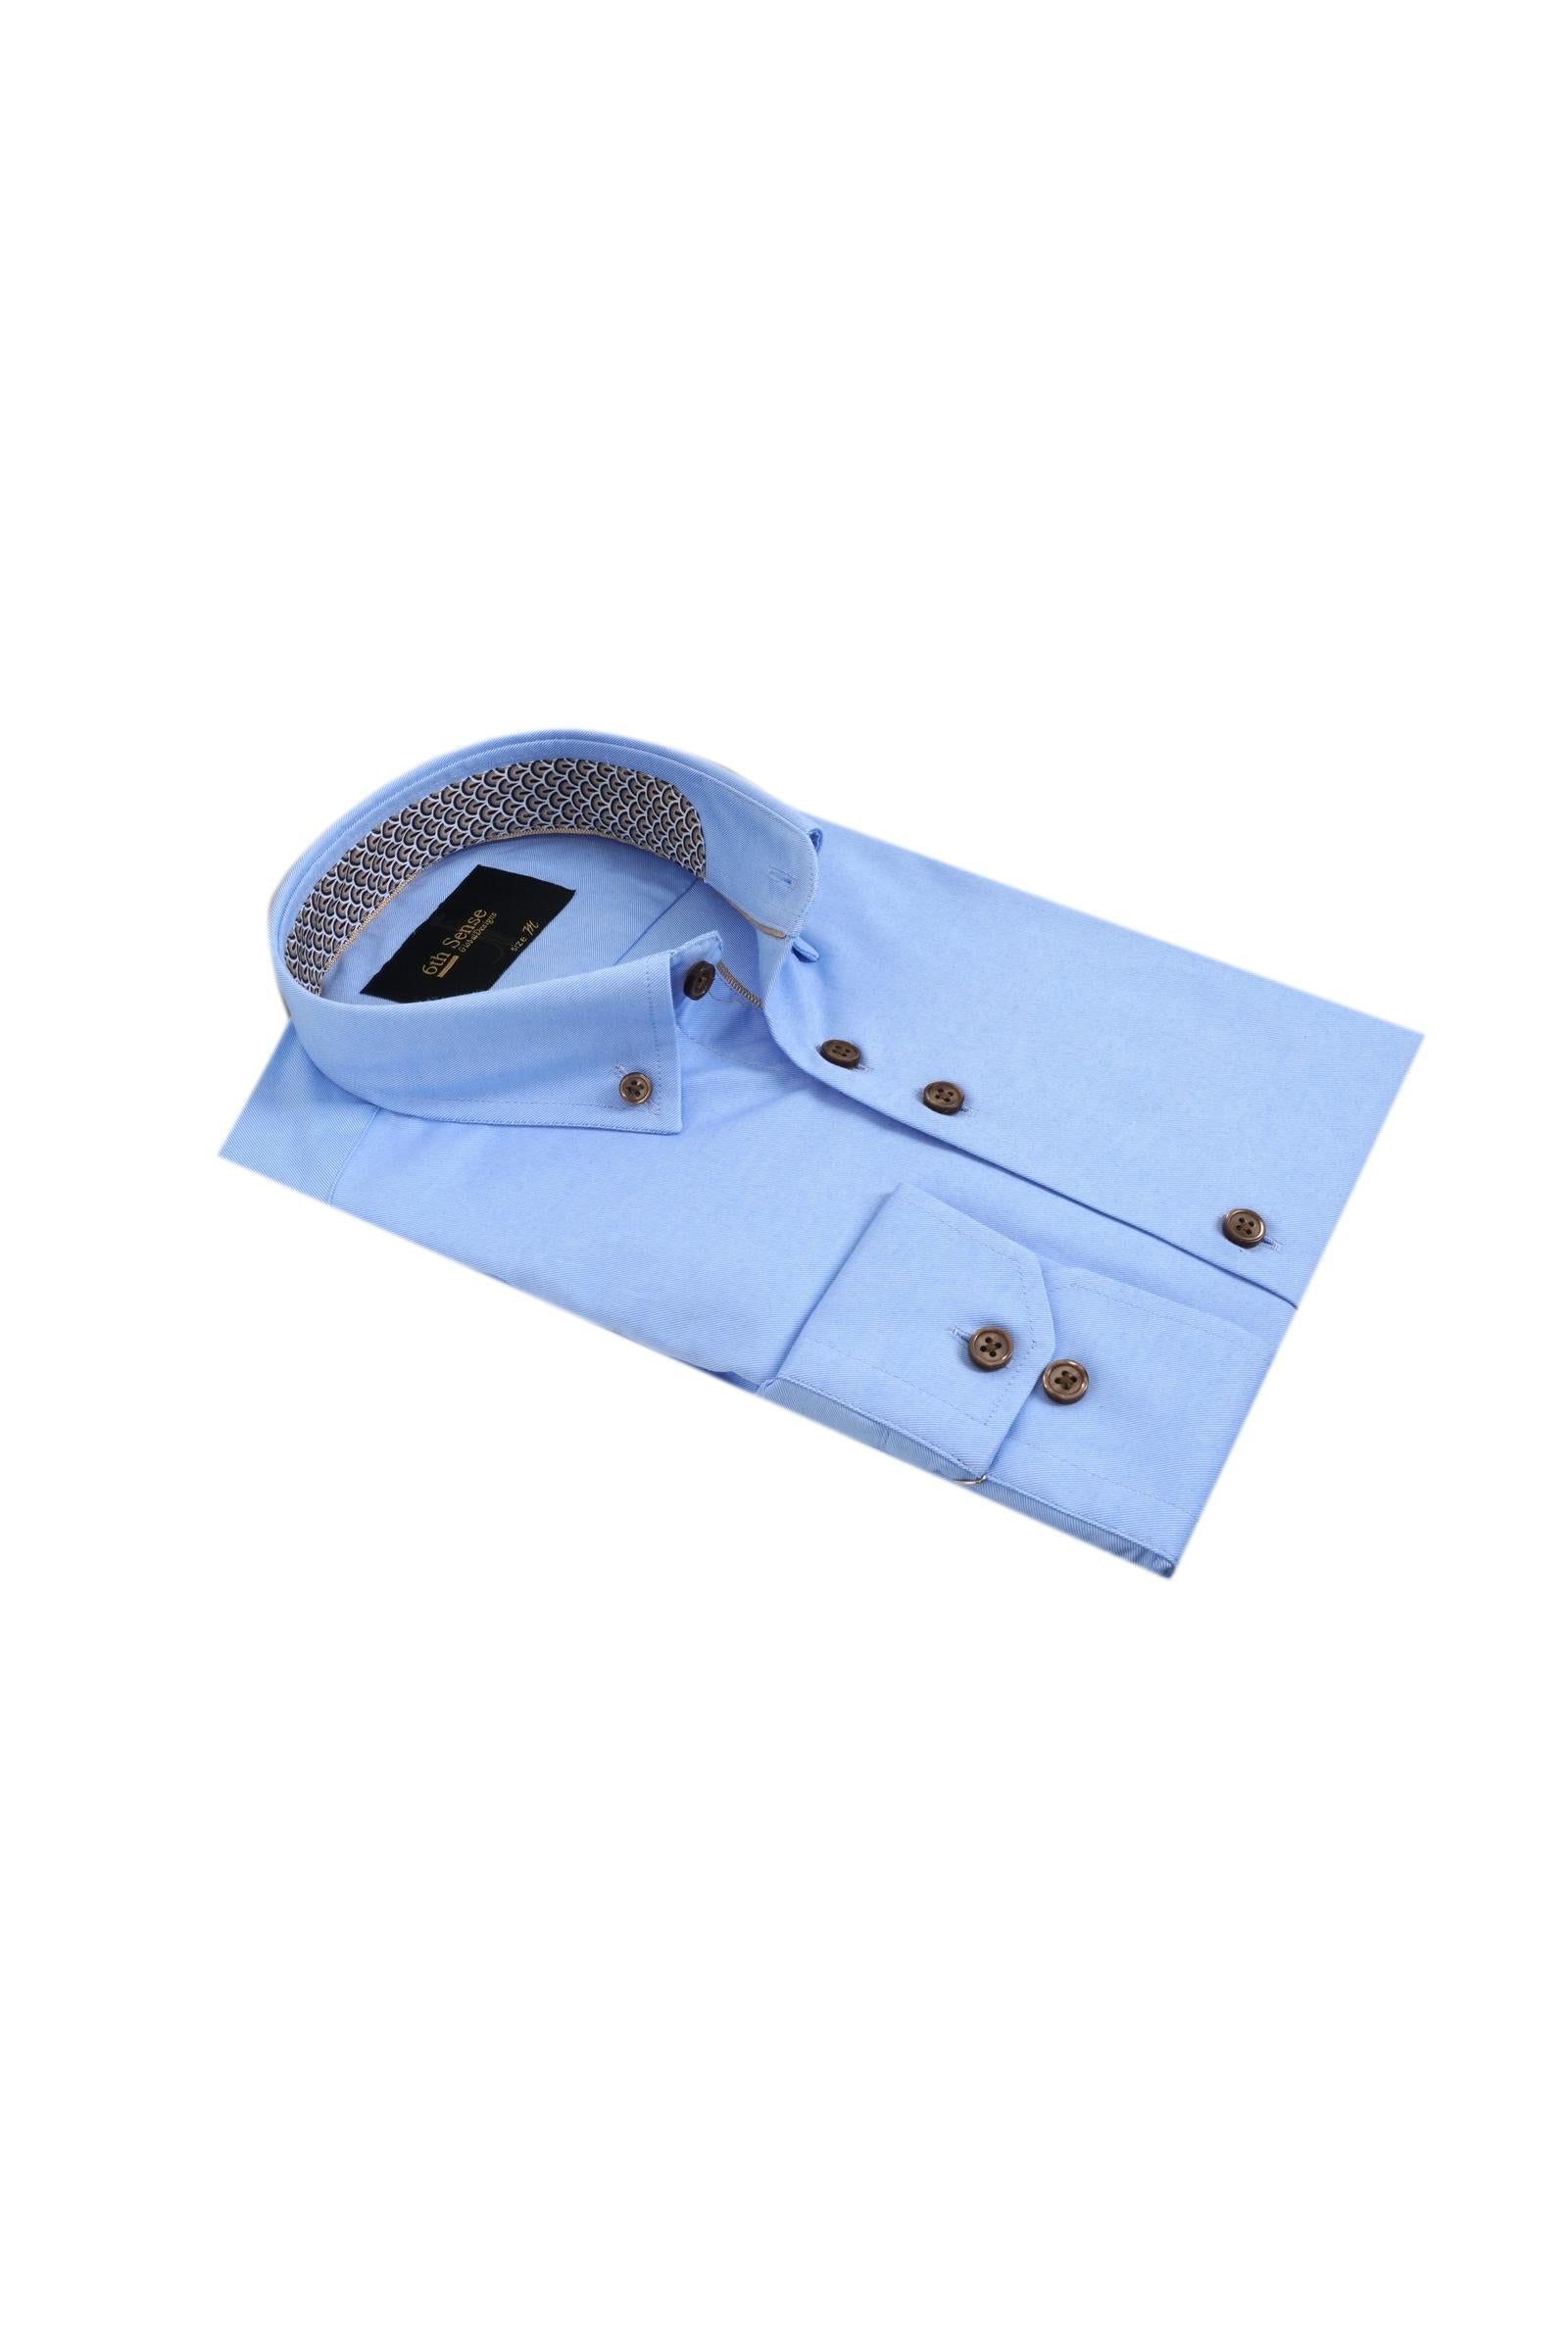 Button Down Blue Shirt-Side folded view